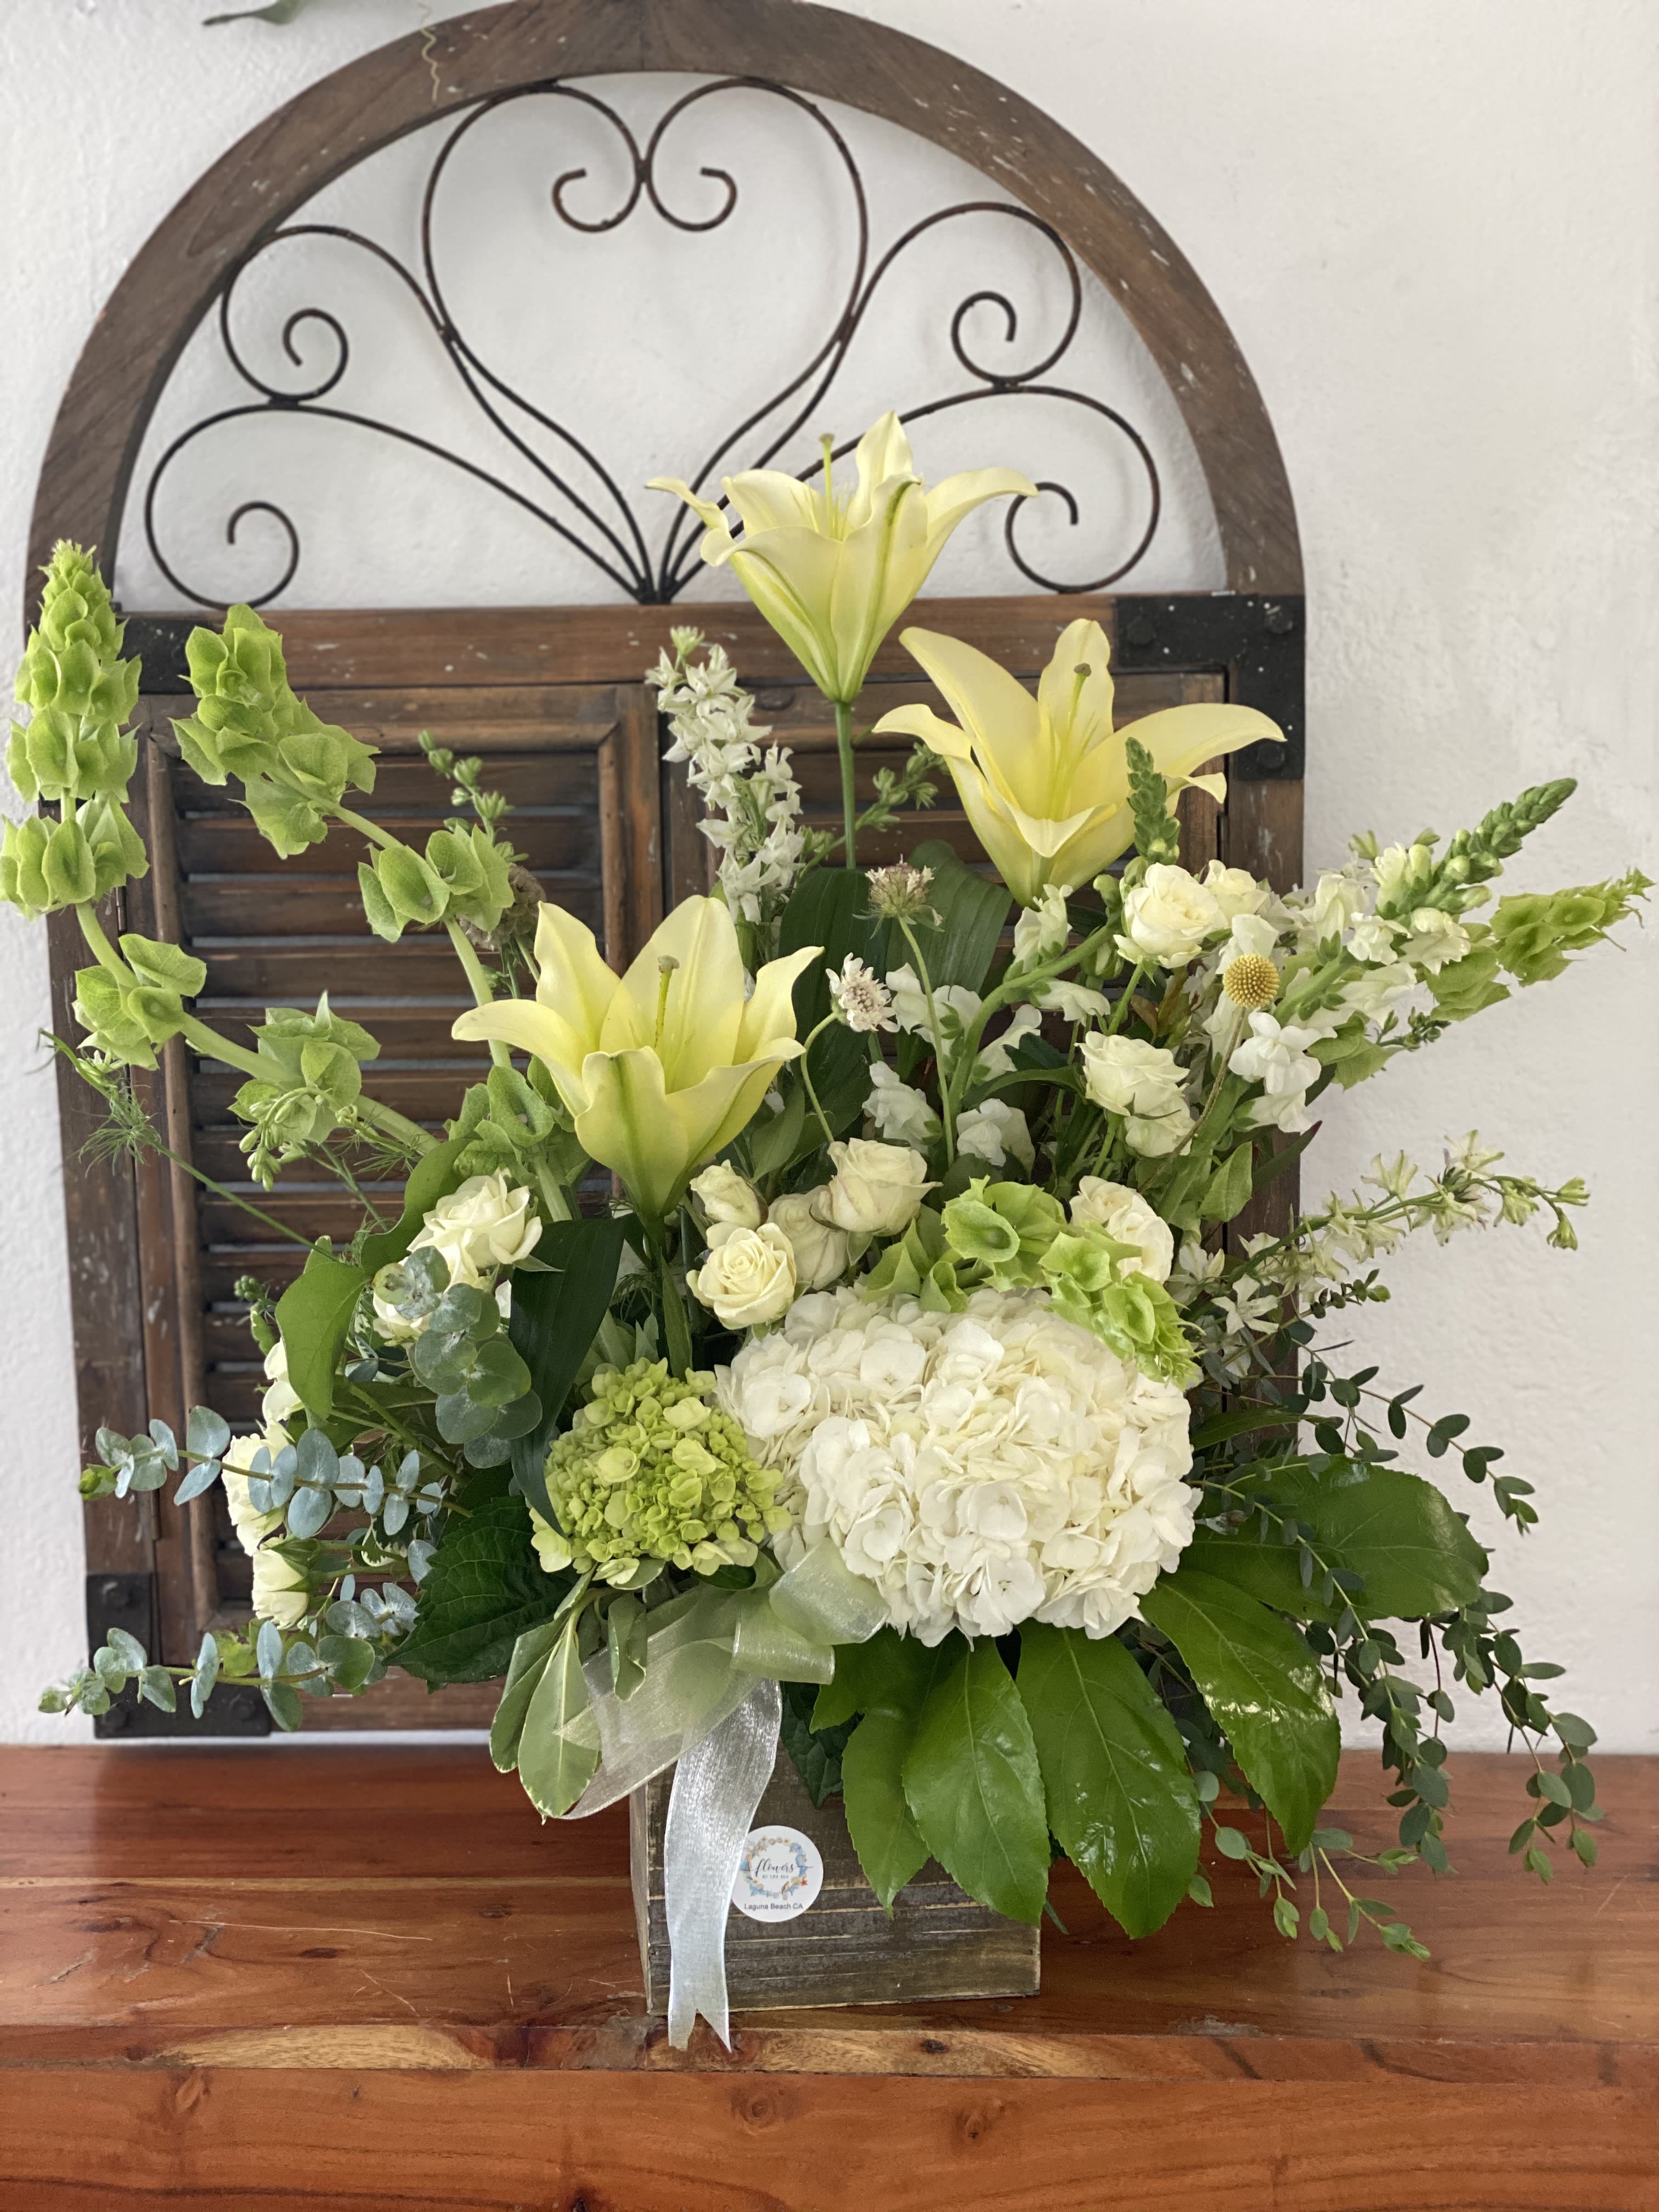 Bells of Laguna  - Green and white bouquet in wood box.